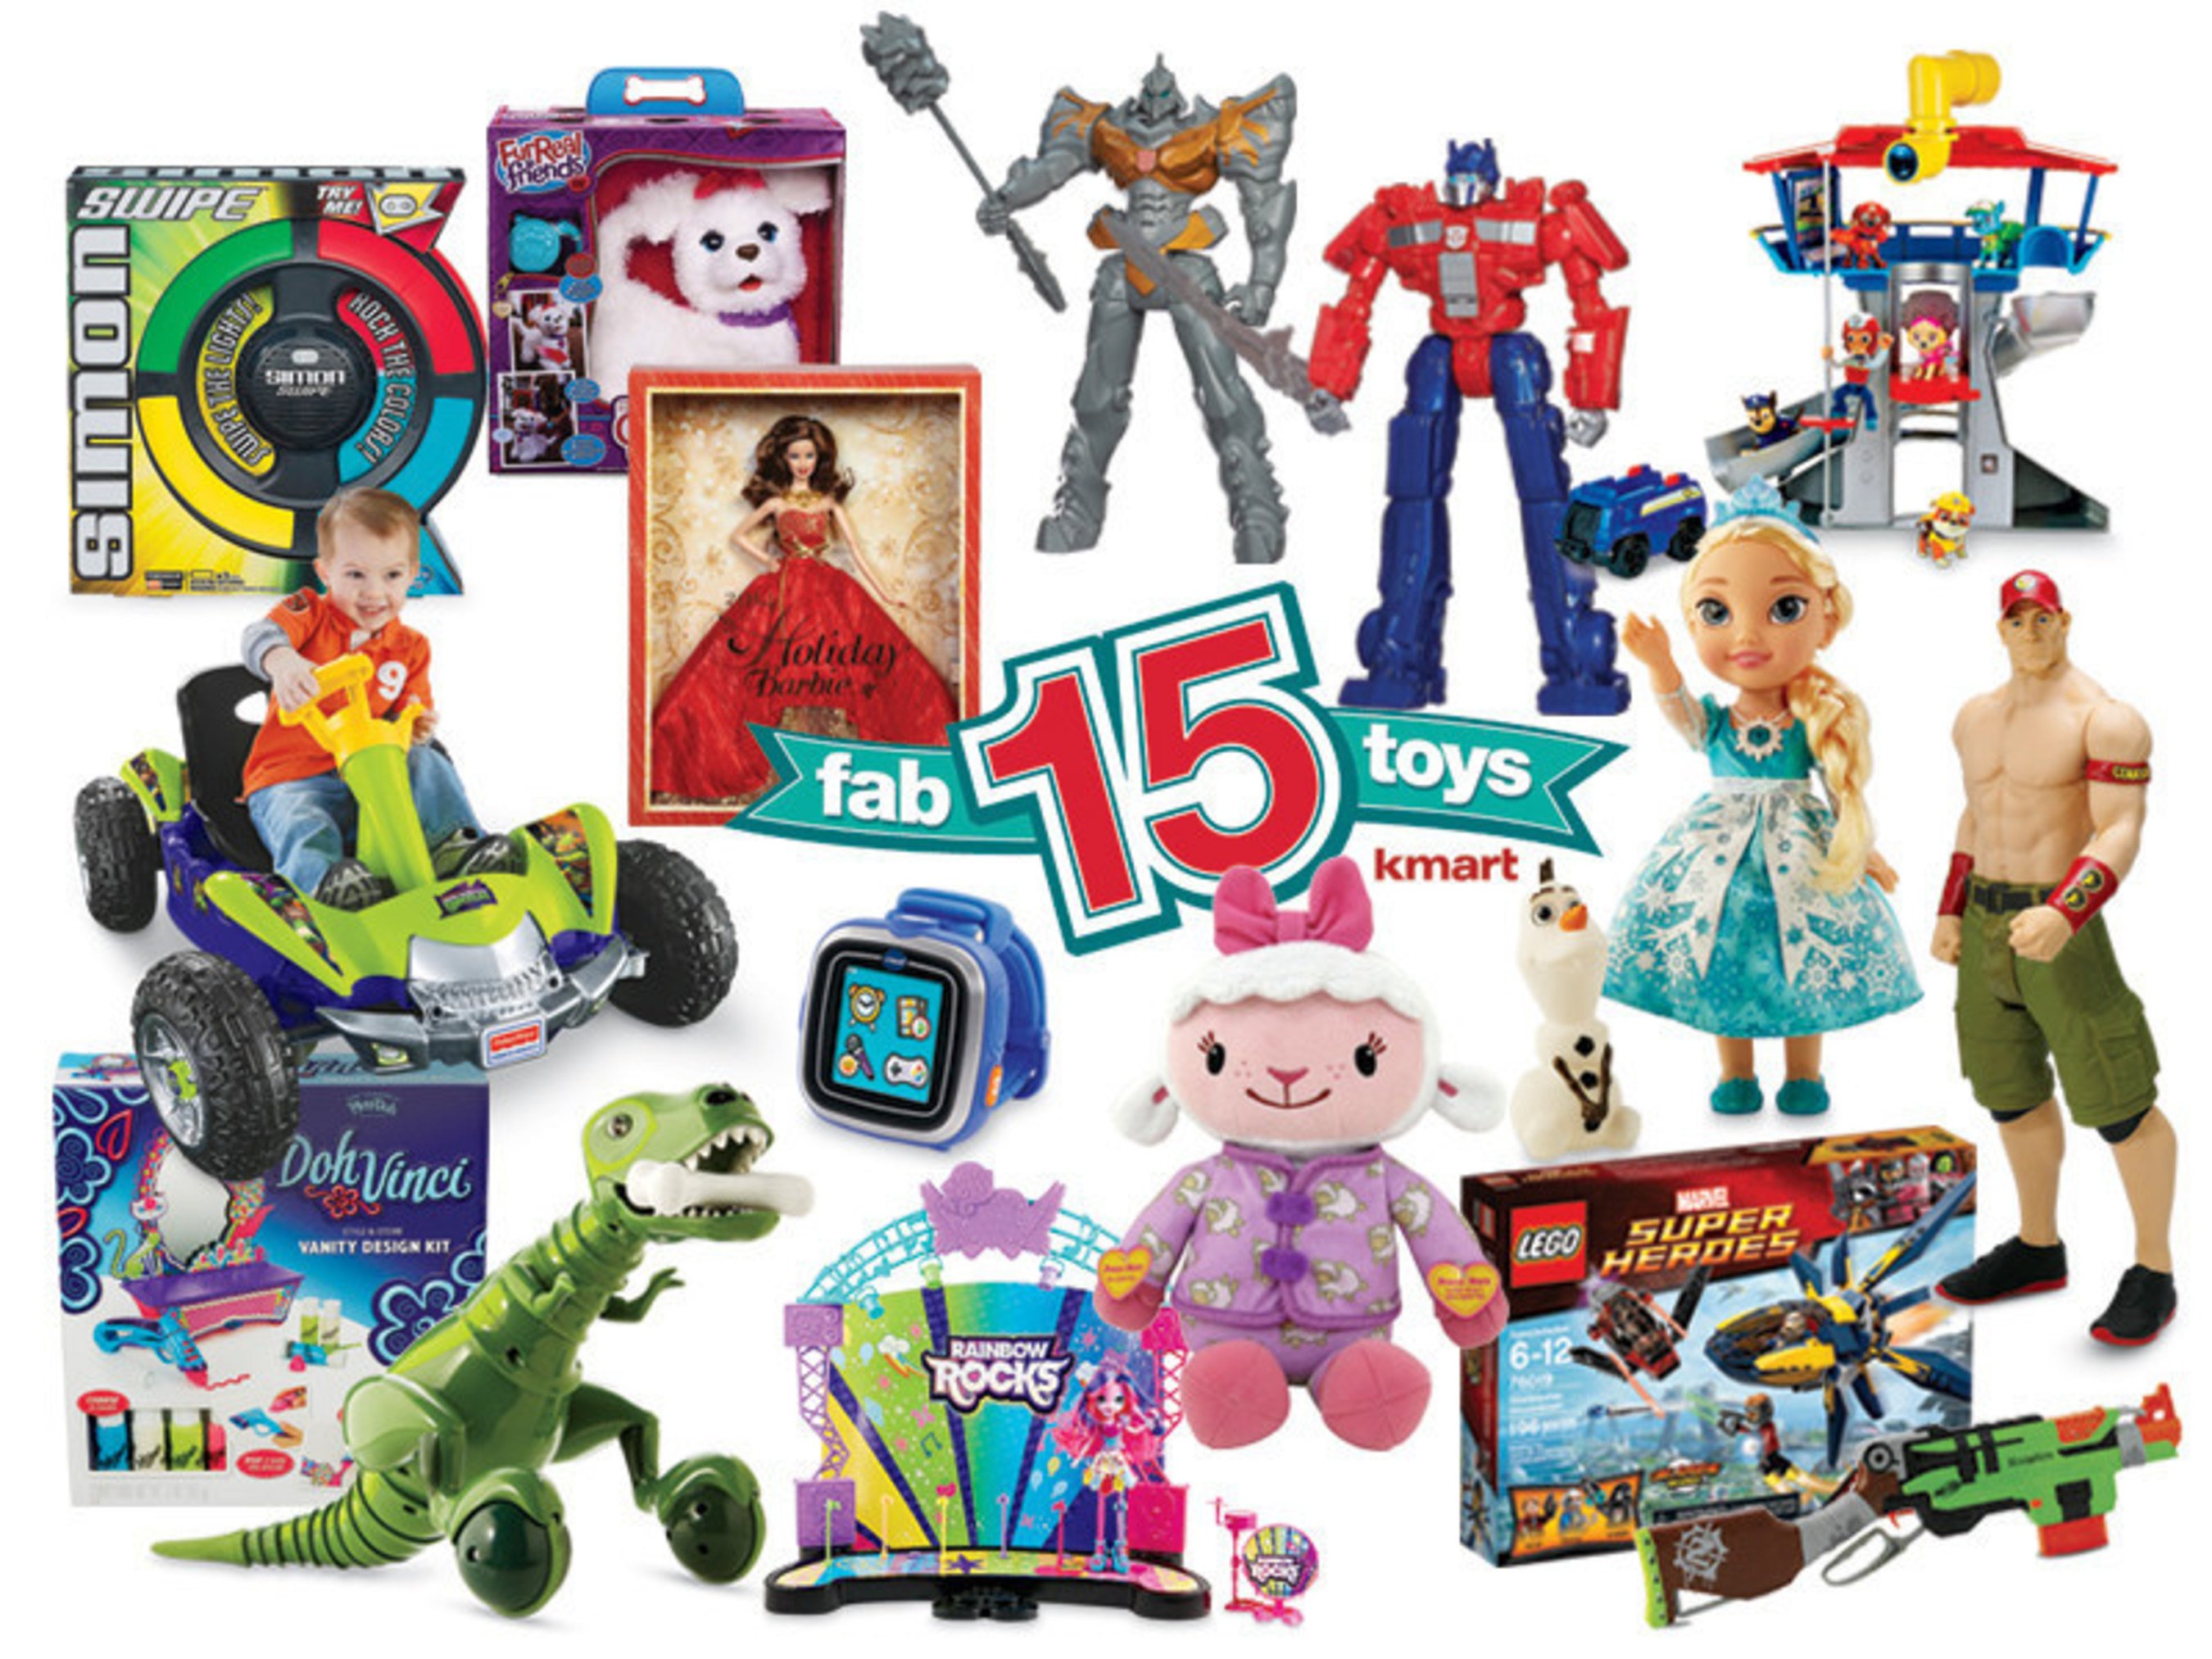 Kmart Fab 15 Toy Pers To Make